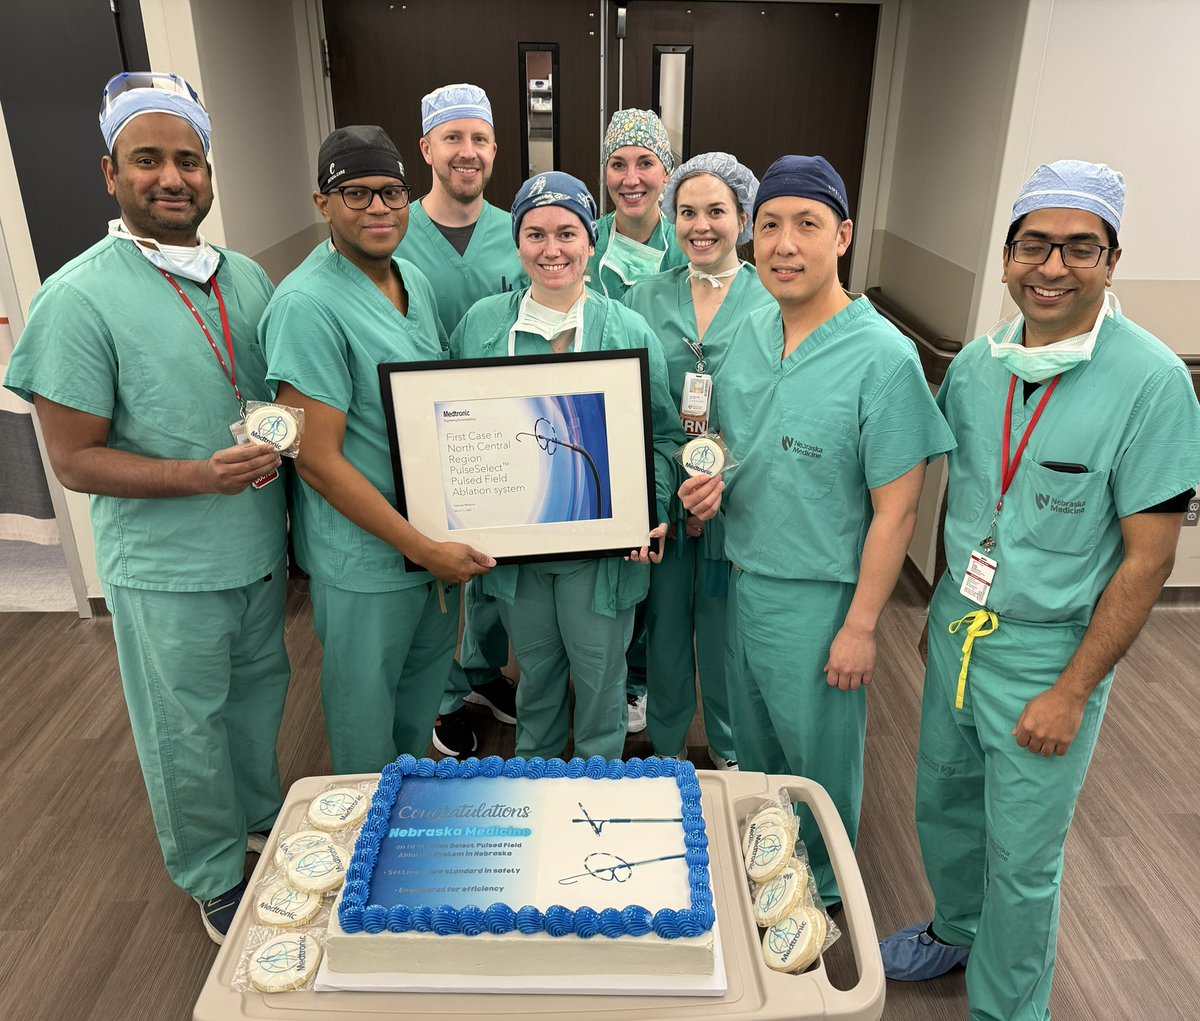 #PulsedFieldAblation @CvUnmc and @NebraskaMed. Proud to offer new treatment options for #AtrialFibrillation